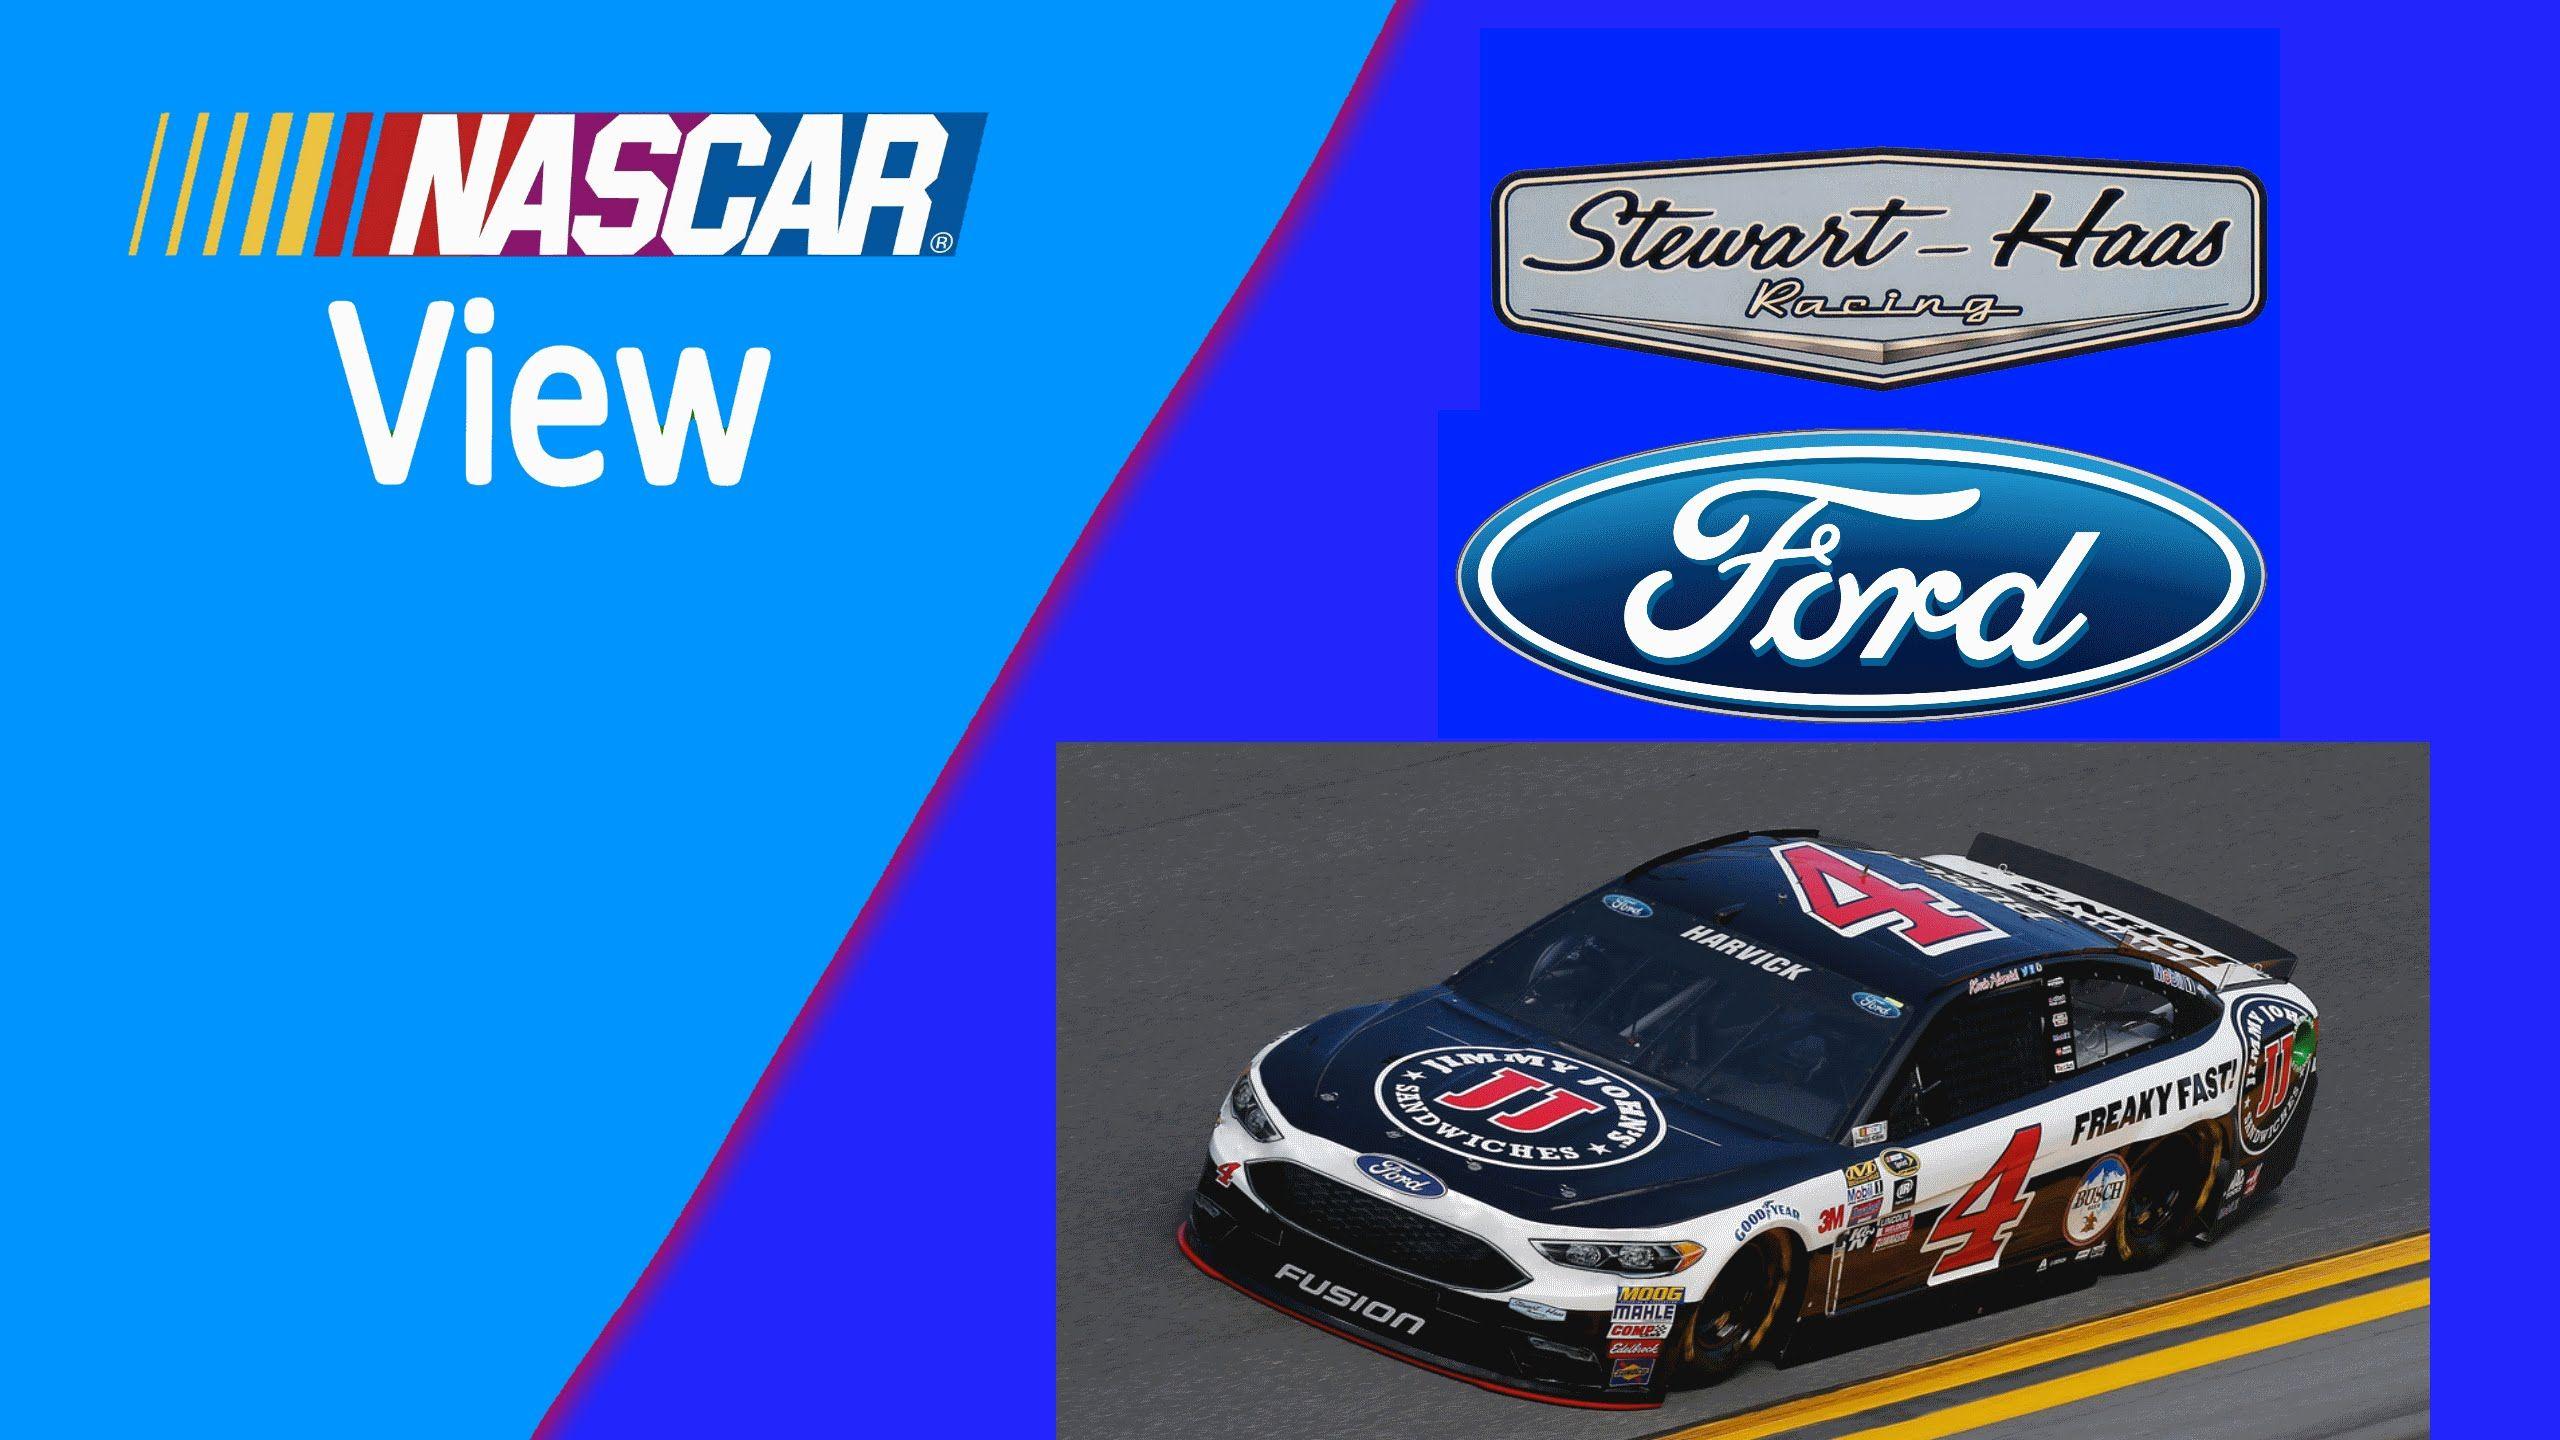 NASCAR View Stewart Haas Racing Switching to Ford in 2017